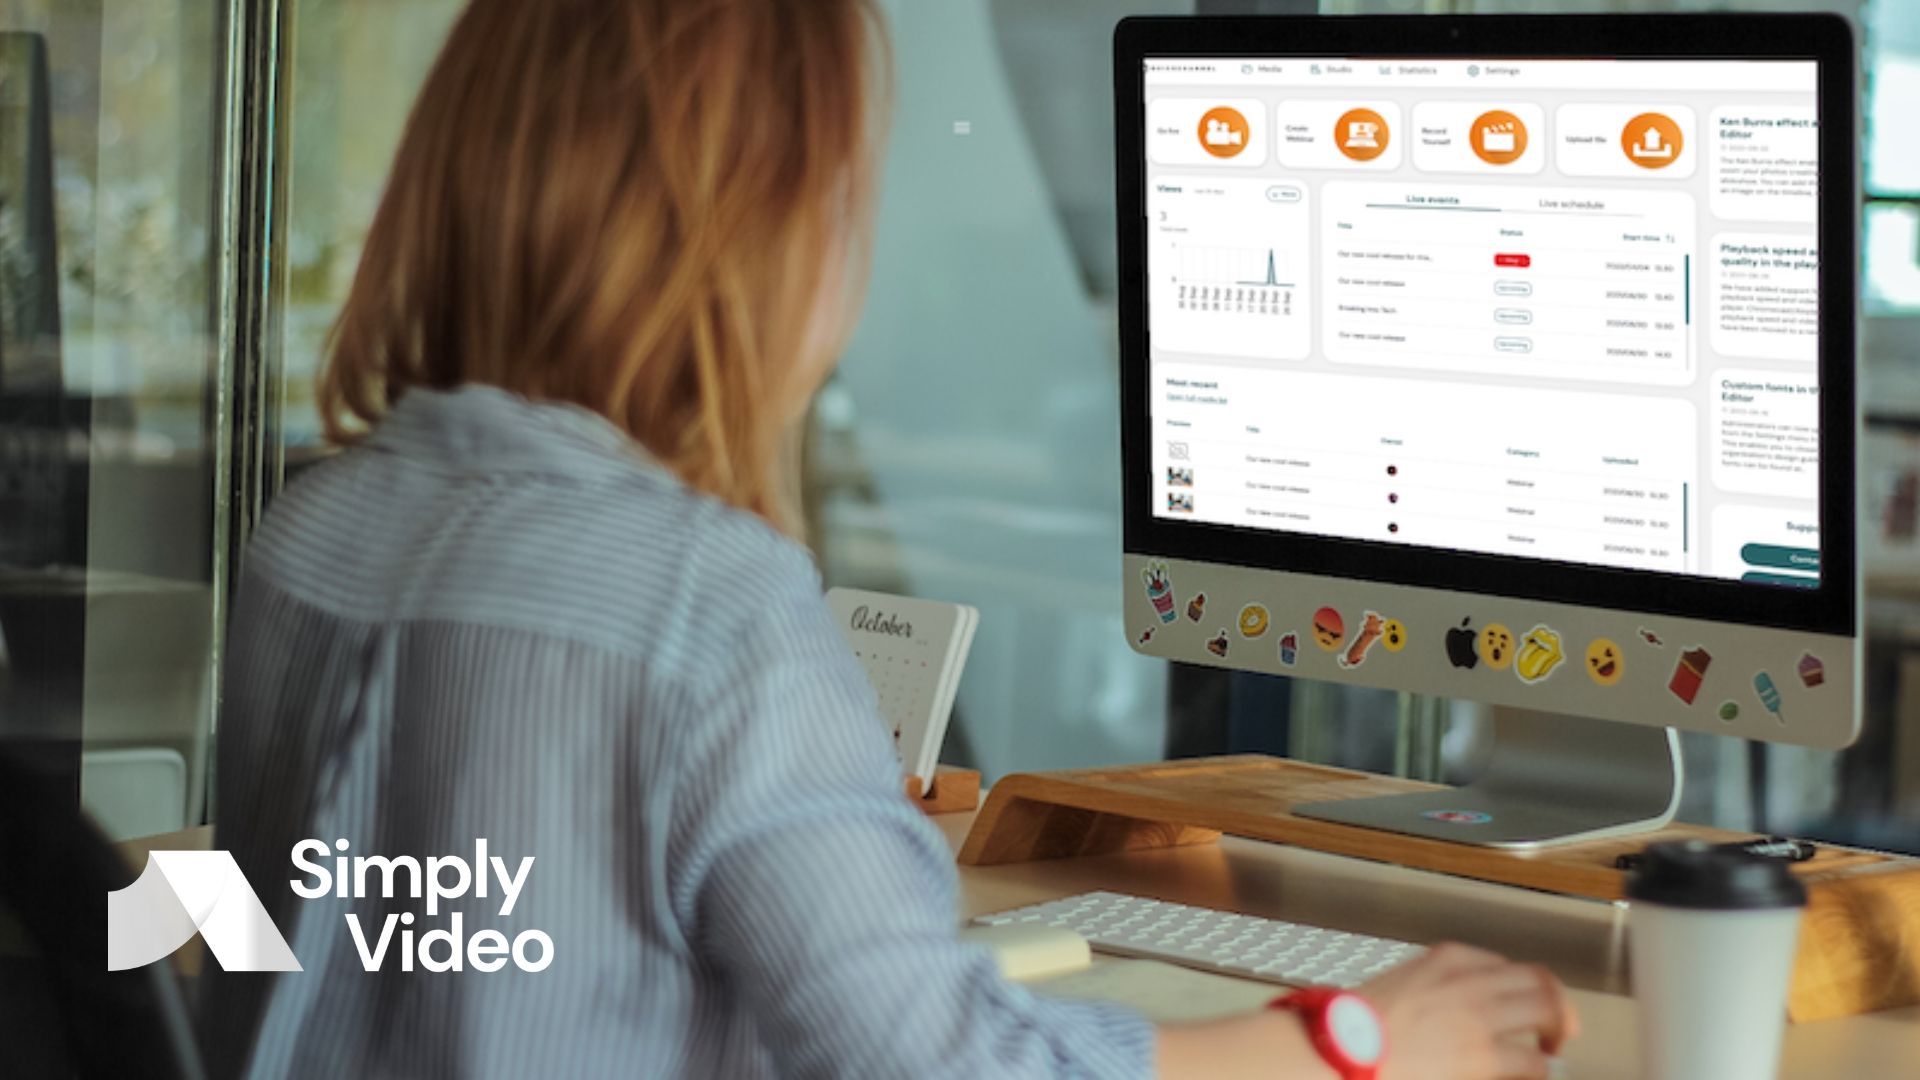 QuickChannel is an enterprise video solution that integrates with SimplyVideo. Learn more about these powerful platforms and how they work together.